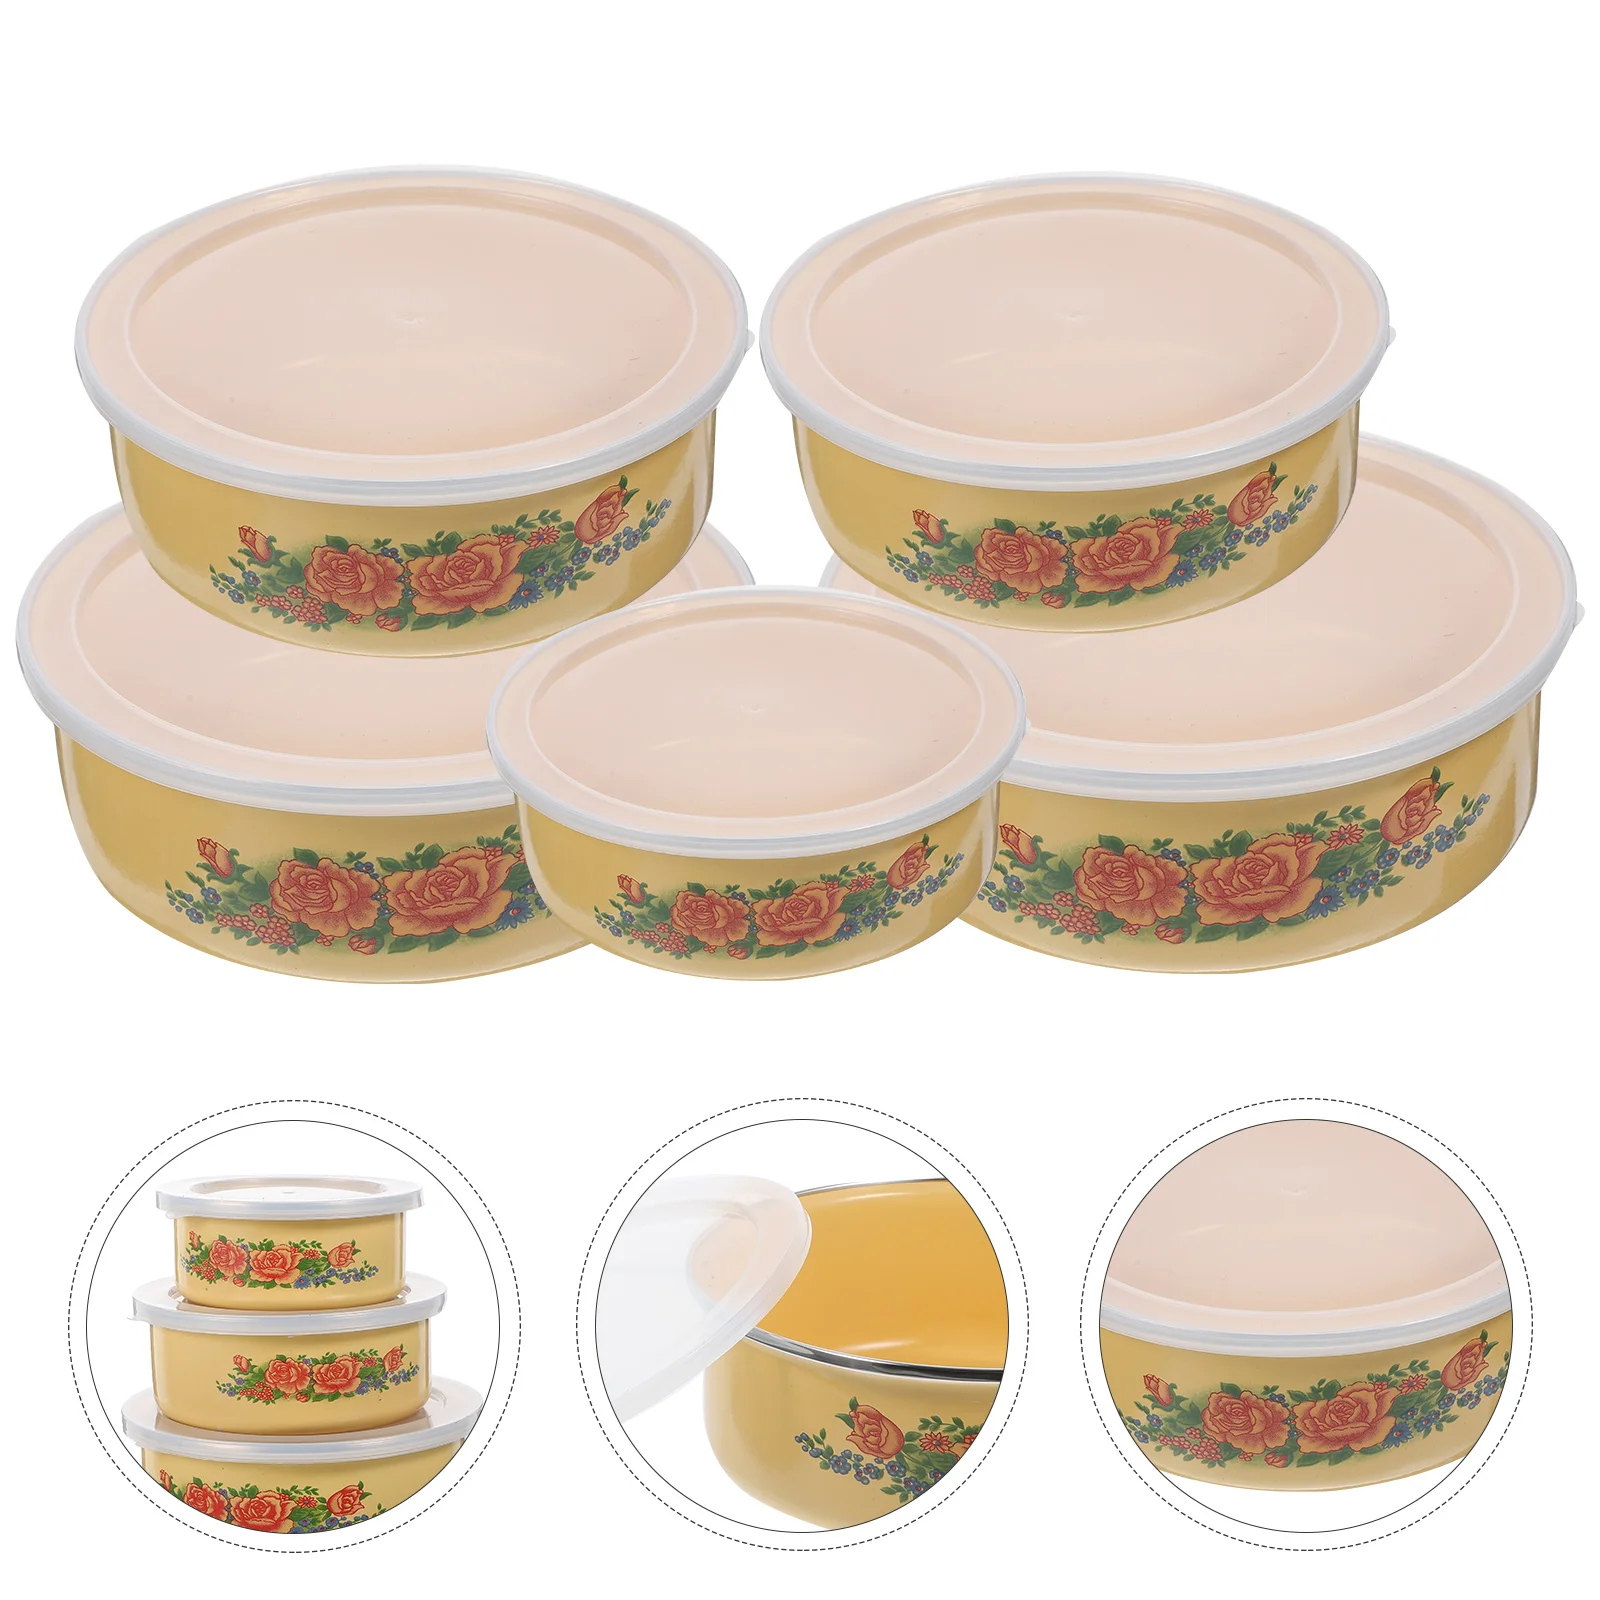 

5 Pcs Enamel Thickened Preservation Bowl with Lid Kitchen Items Deepen Soup Mixing Food Containers Lids Noodle Bowls Salad